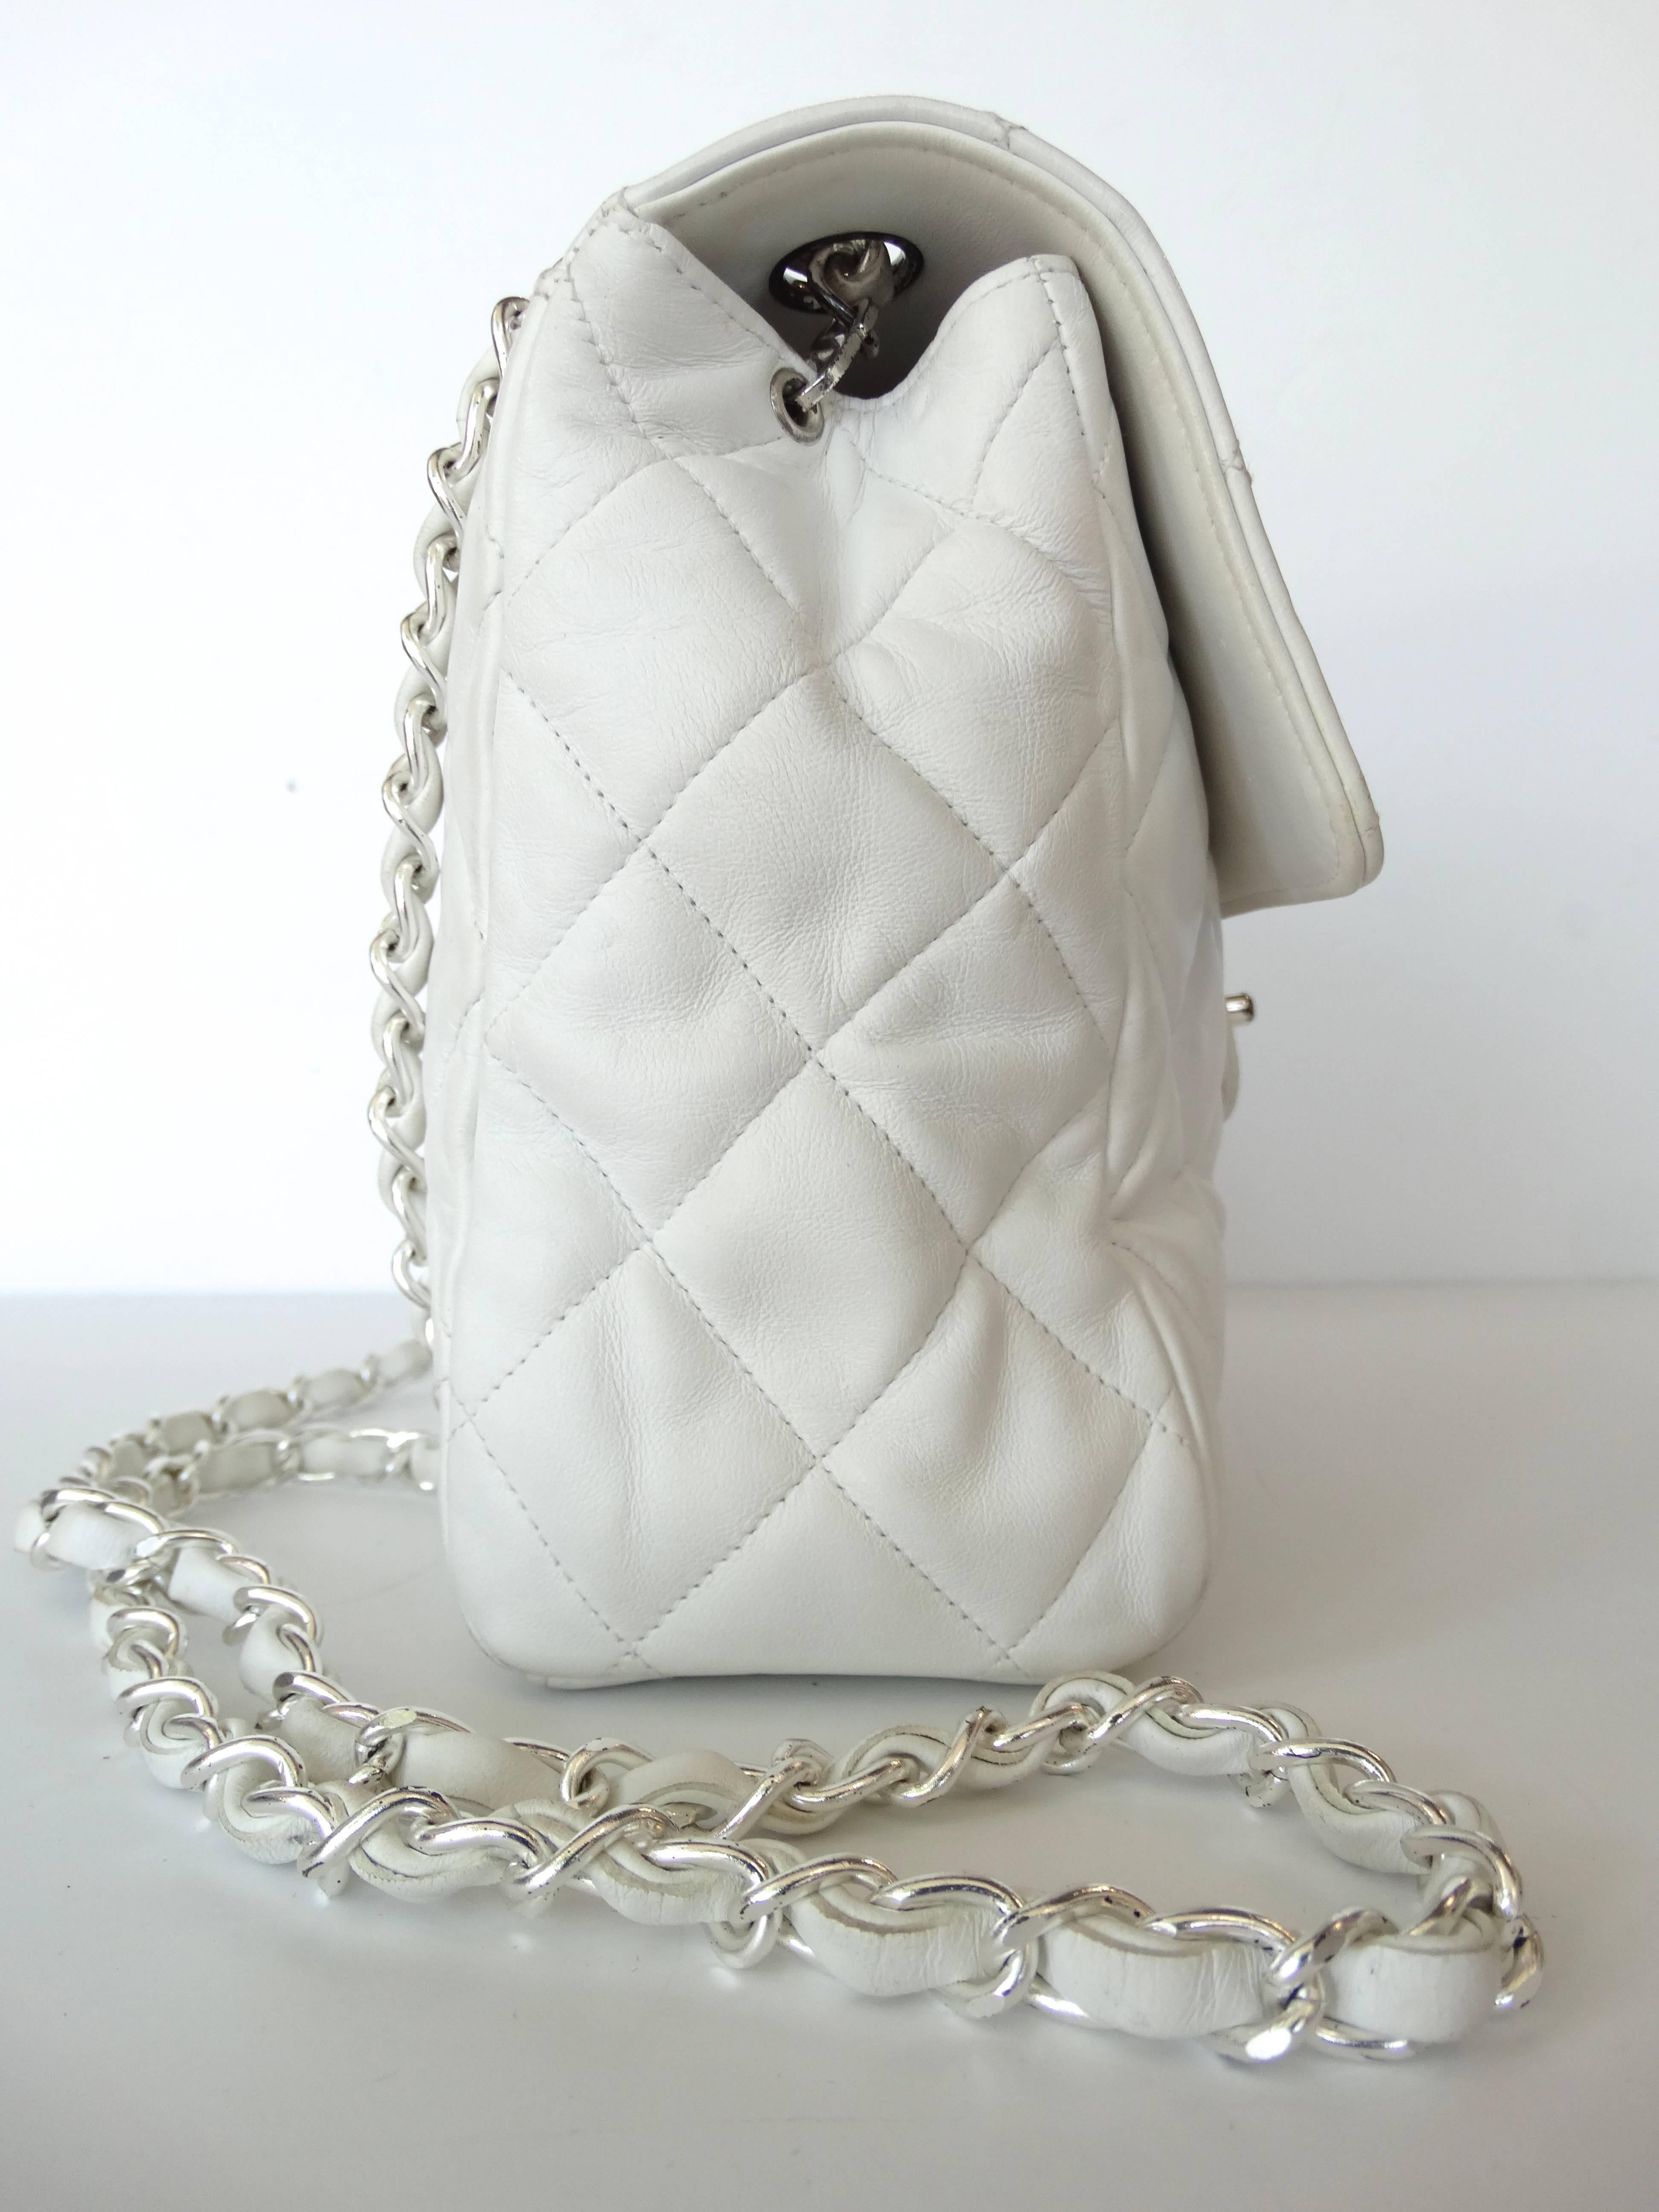 One of the most sought-after models within the house of Chanel, this timeless classic  1990's caviar flap is chic in a White, beautifully contrasted with Plated silver, single chain strap. This style is especially rare and hard to find in caviar 